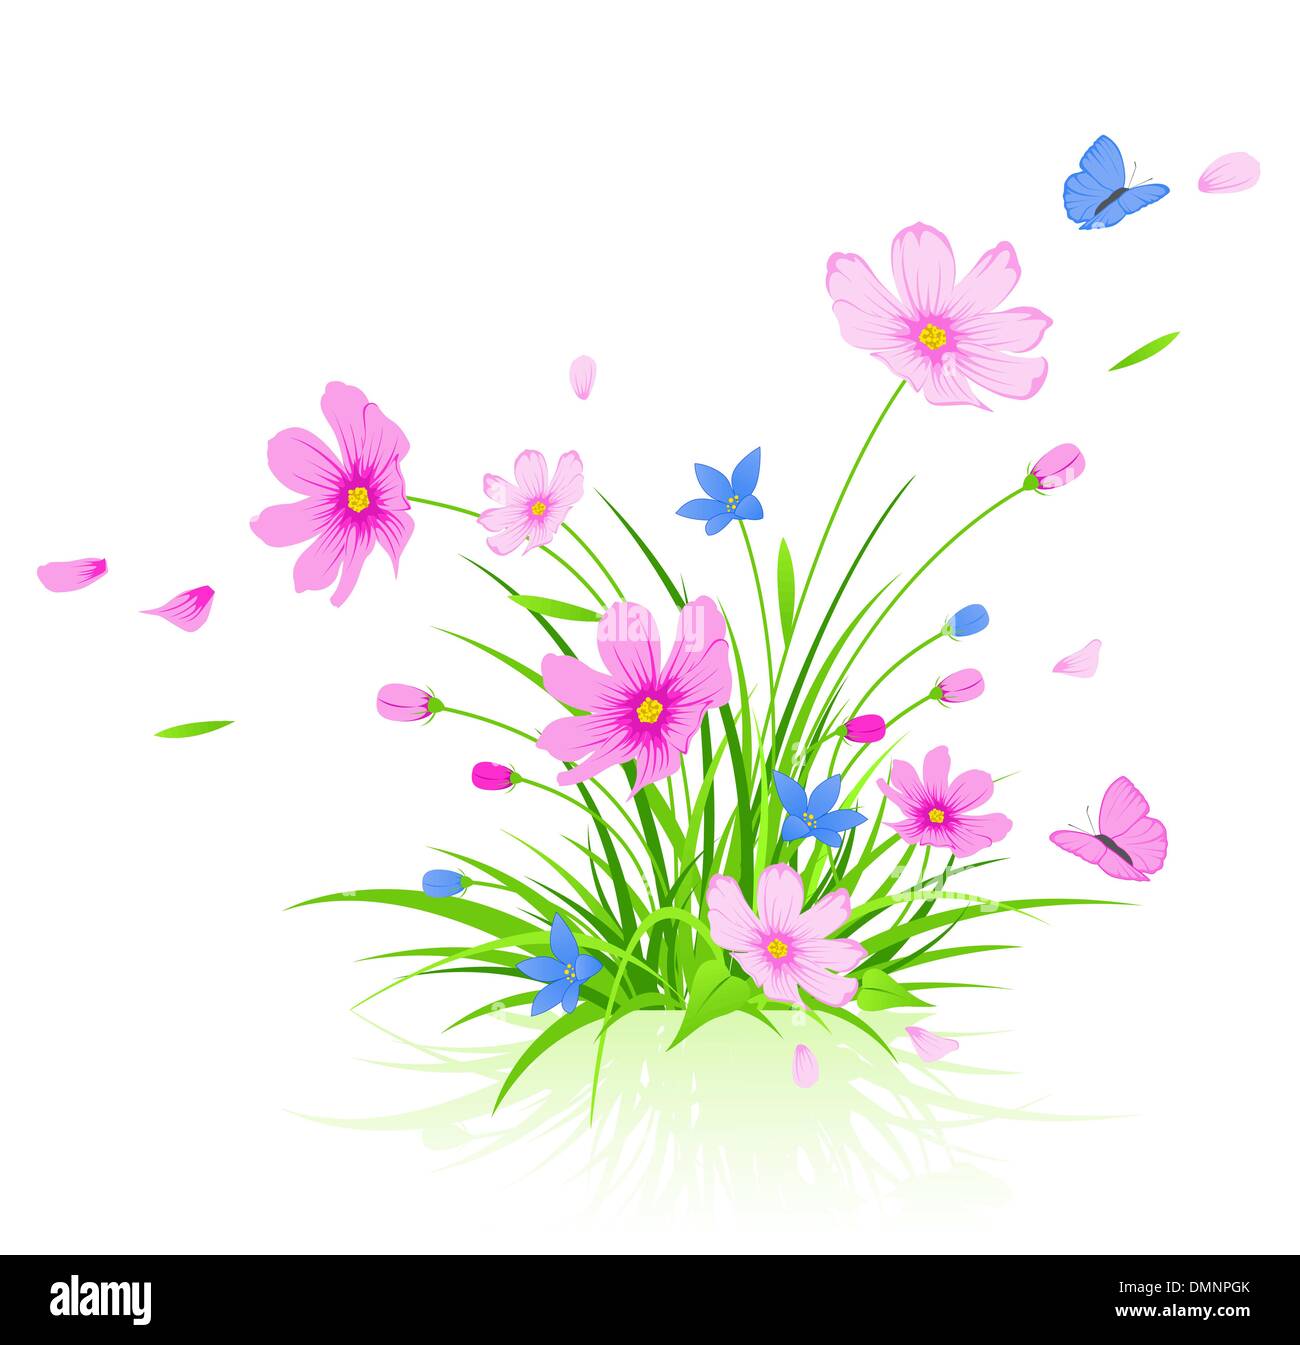 floral background with cosmos flowers Stock Vector